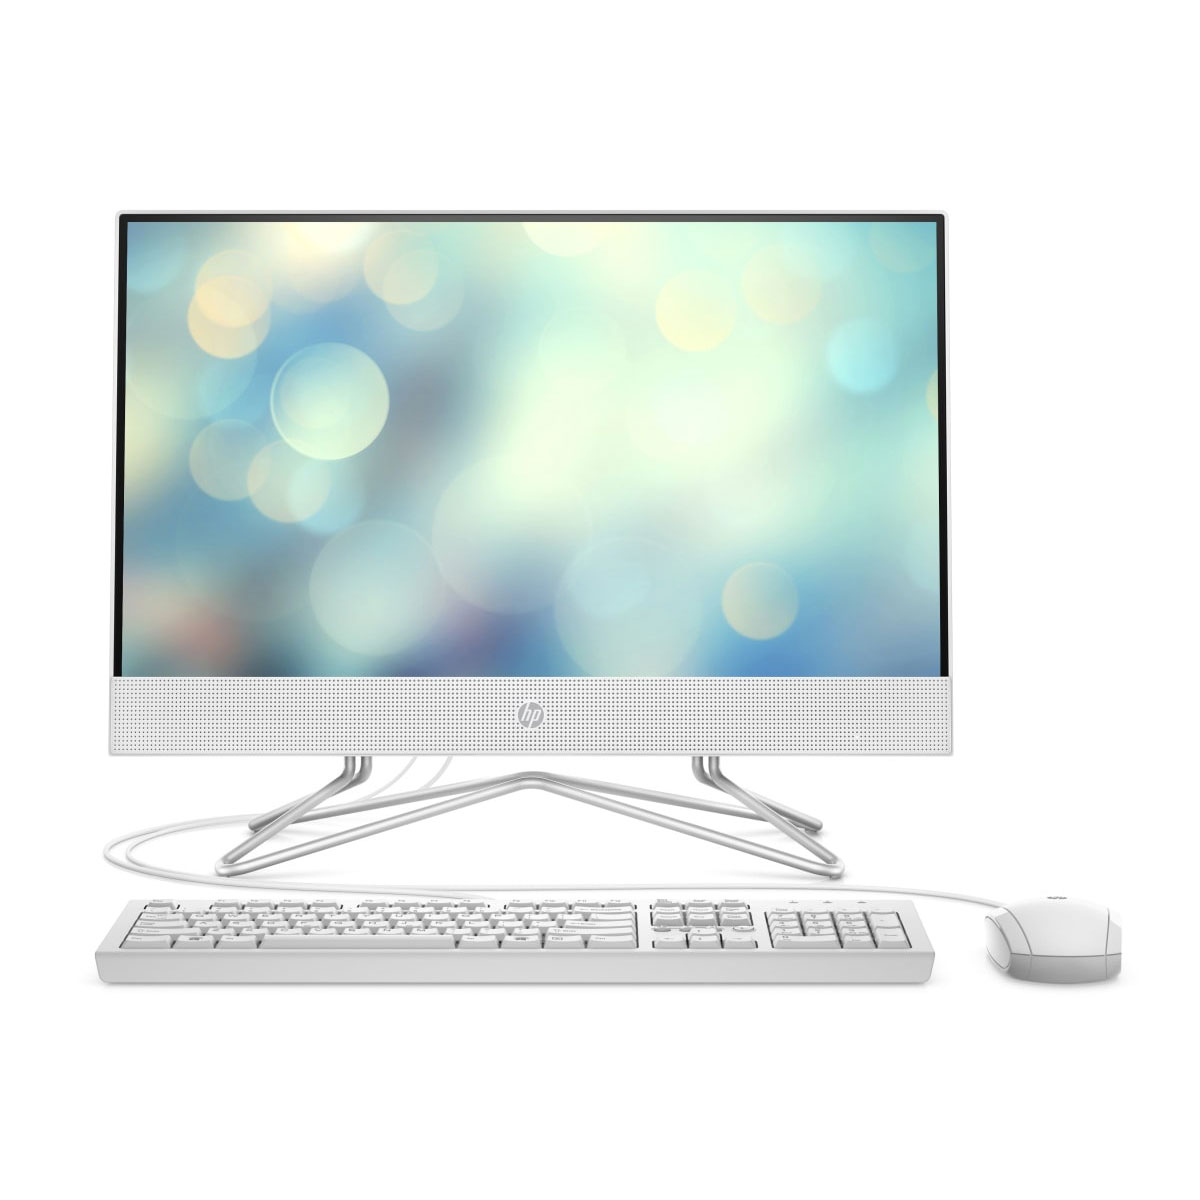 HP 205 G4 All-in-One